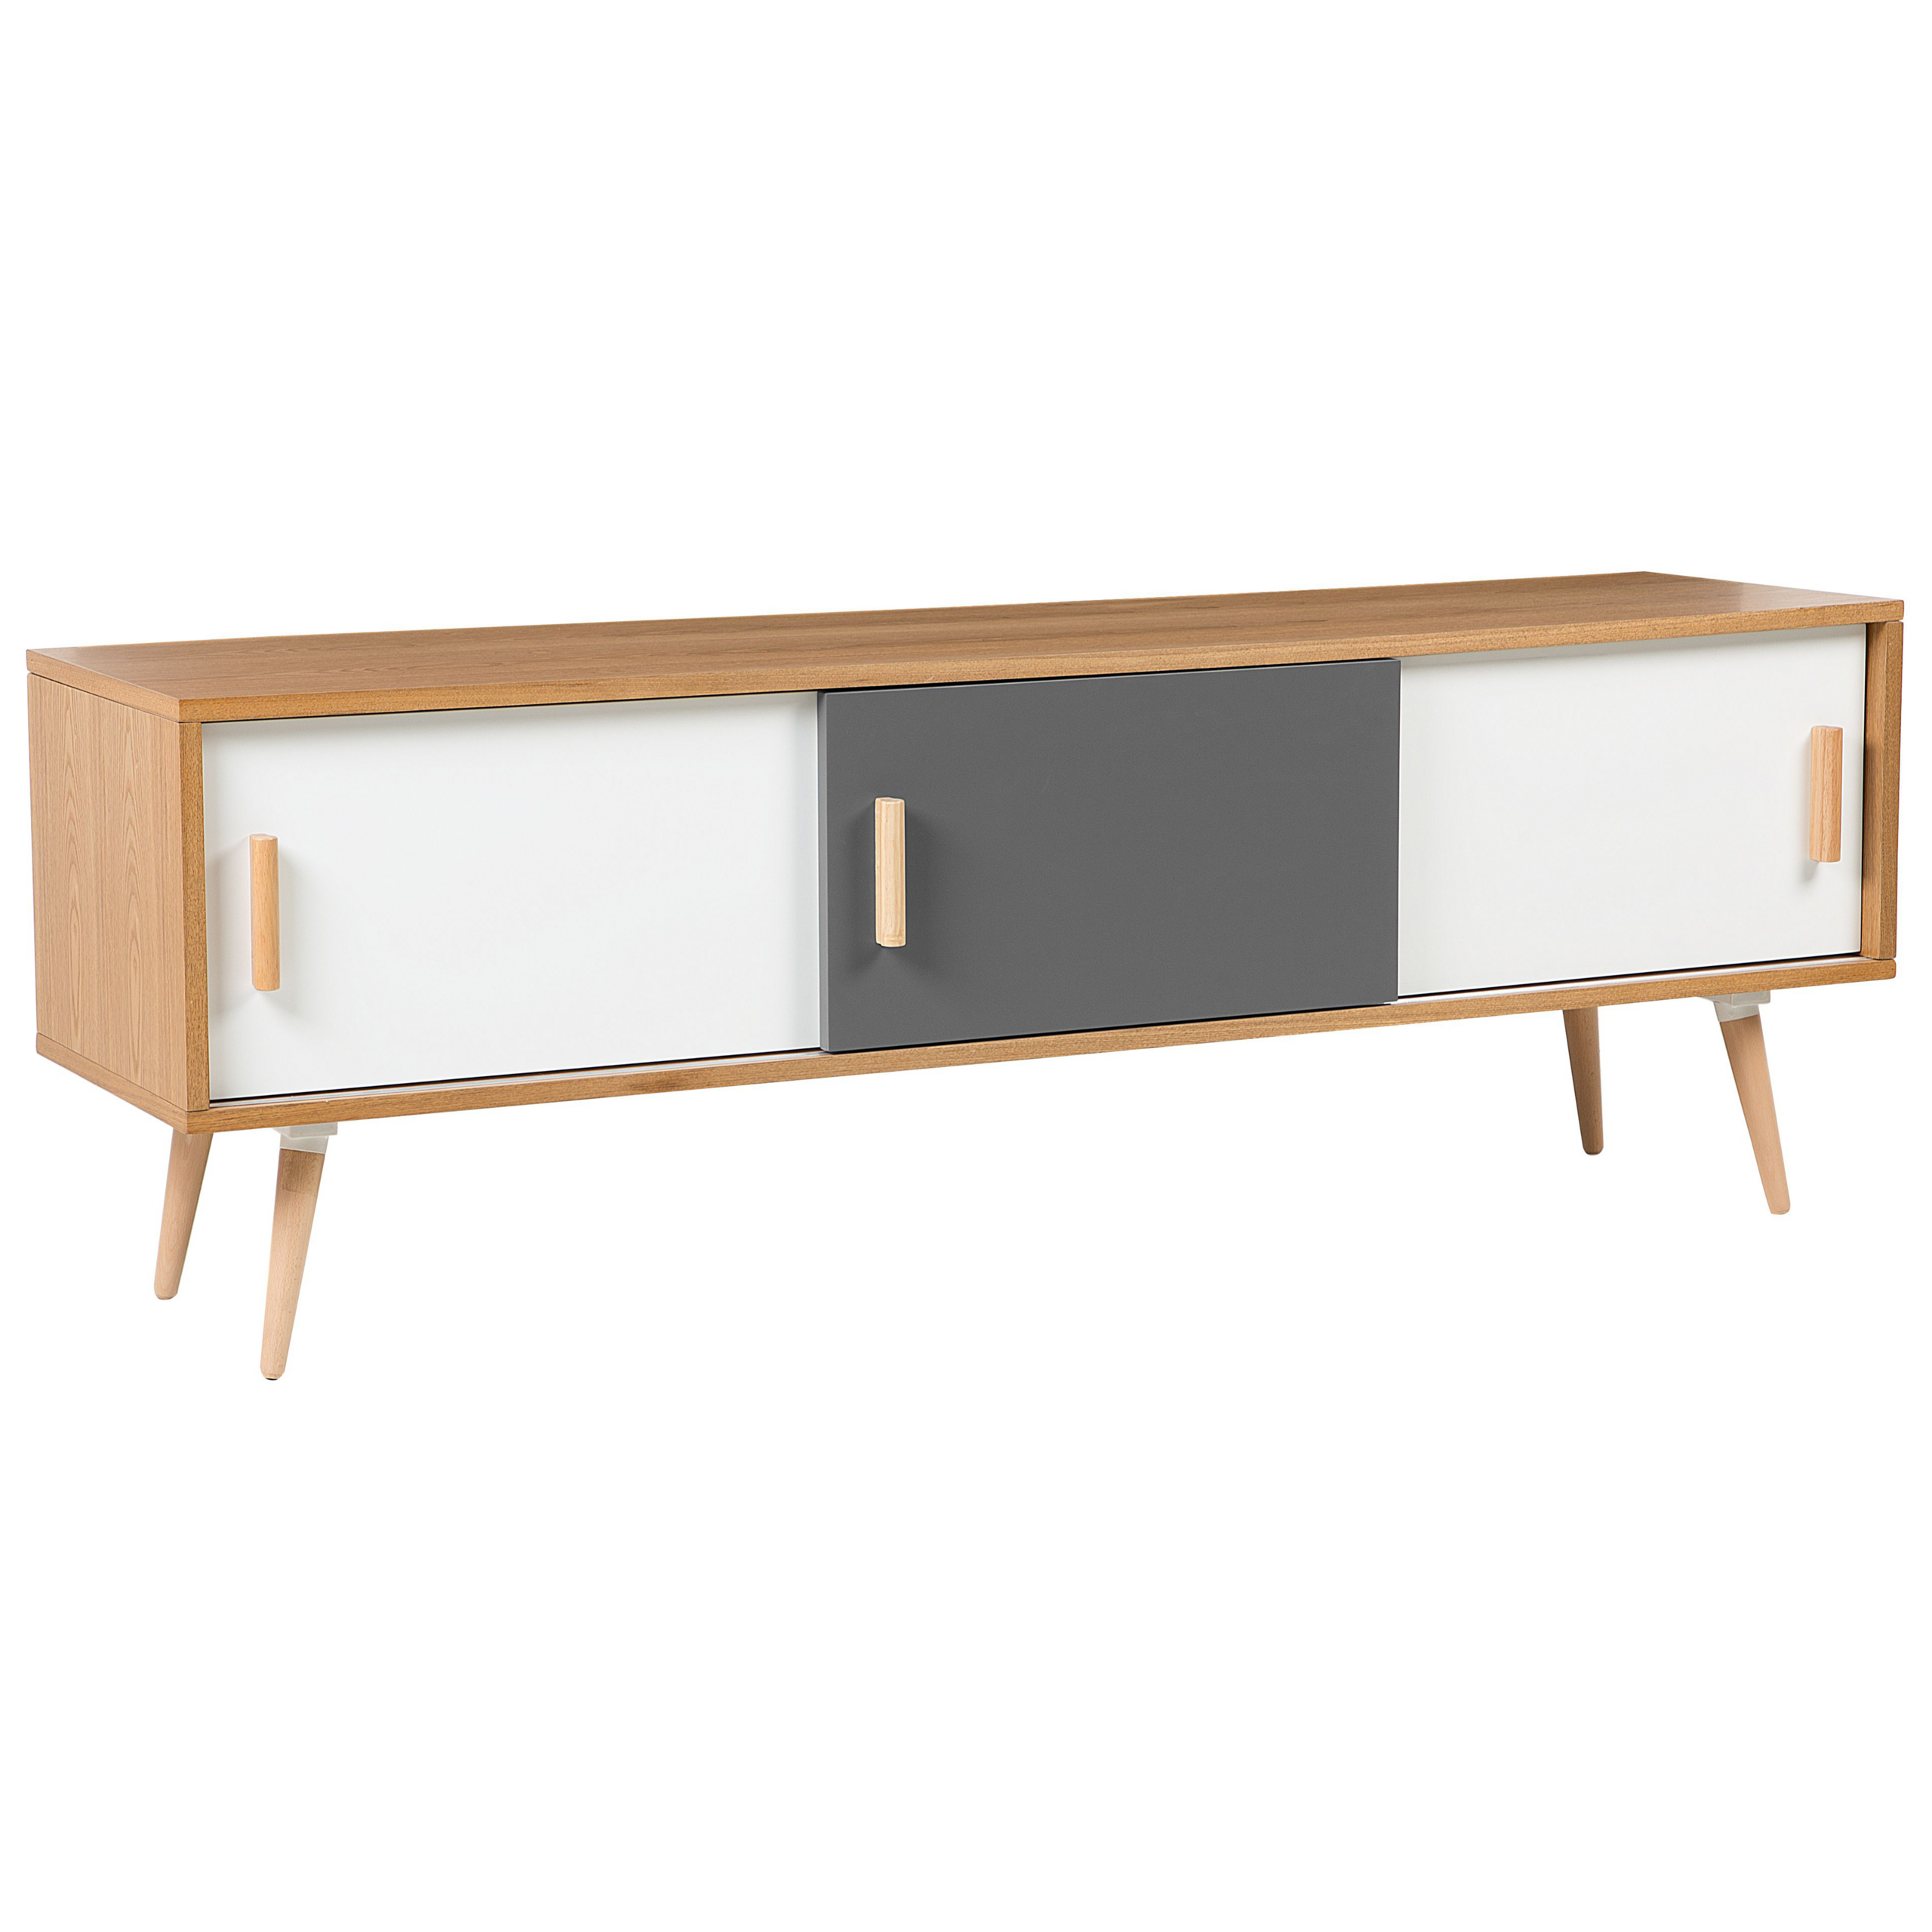 Beliani TV Stand Light Wood TV Up To 72ʺ Recommended 2 Sliding Doors Cabinets Scandinavian